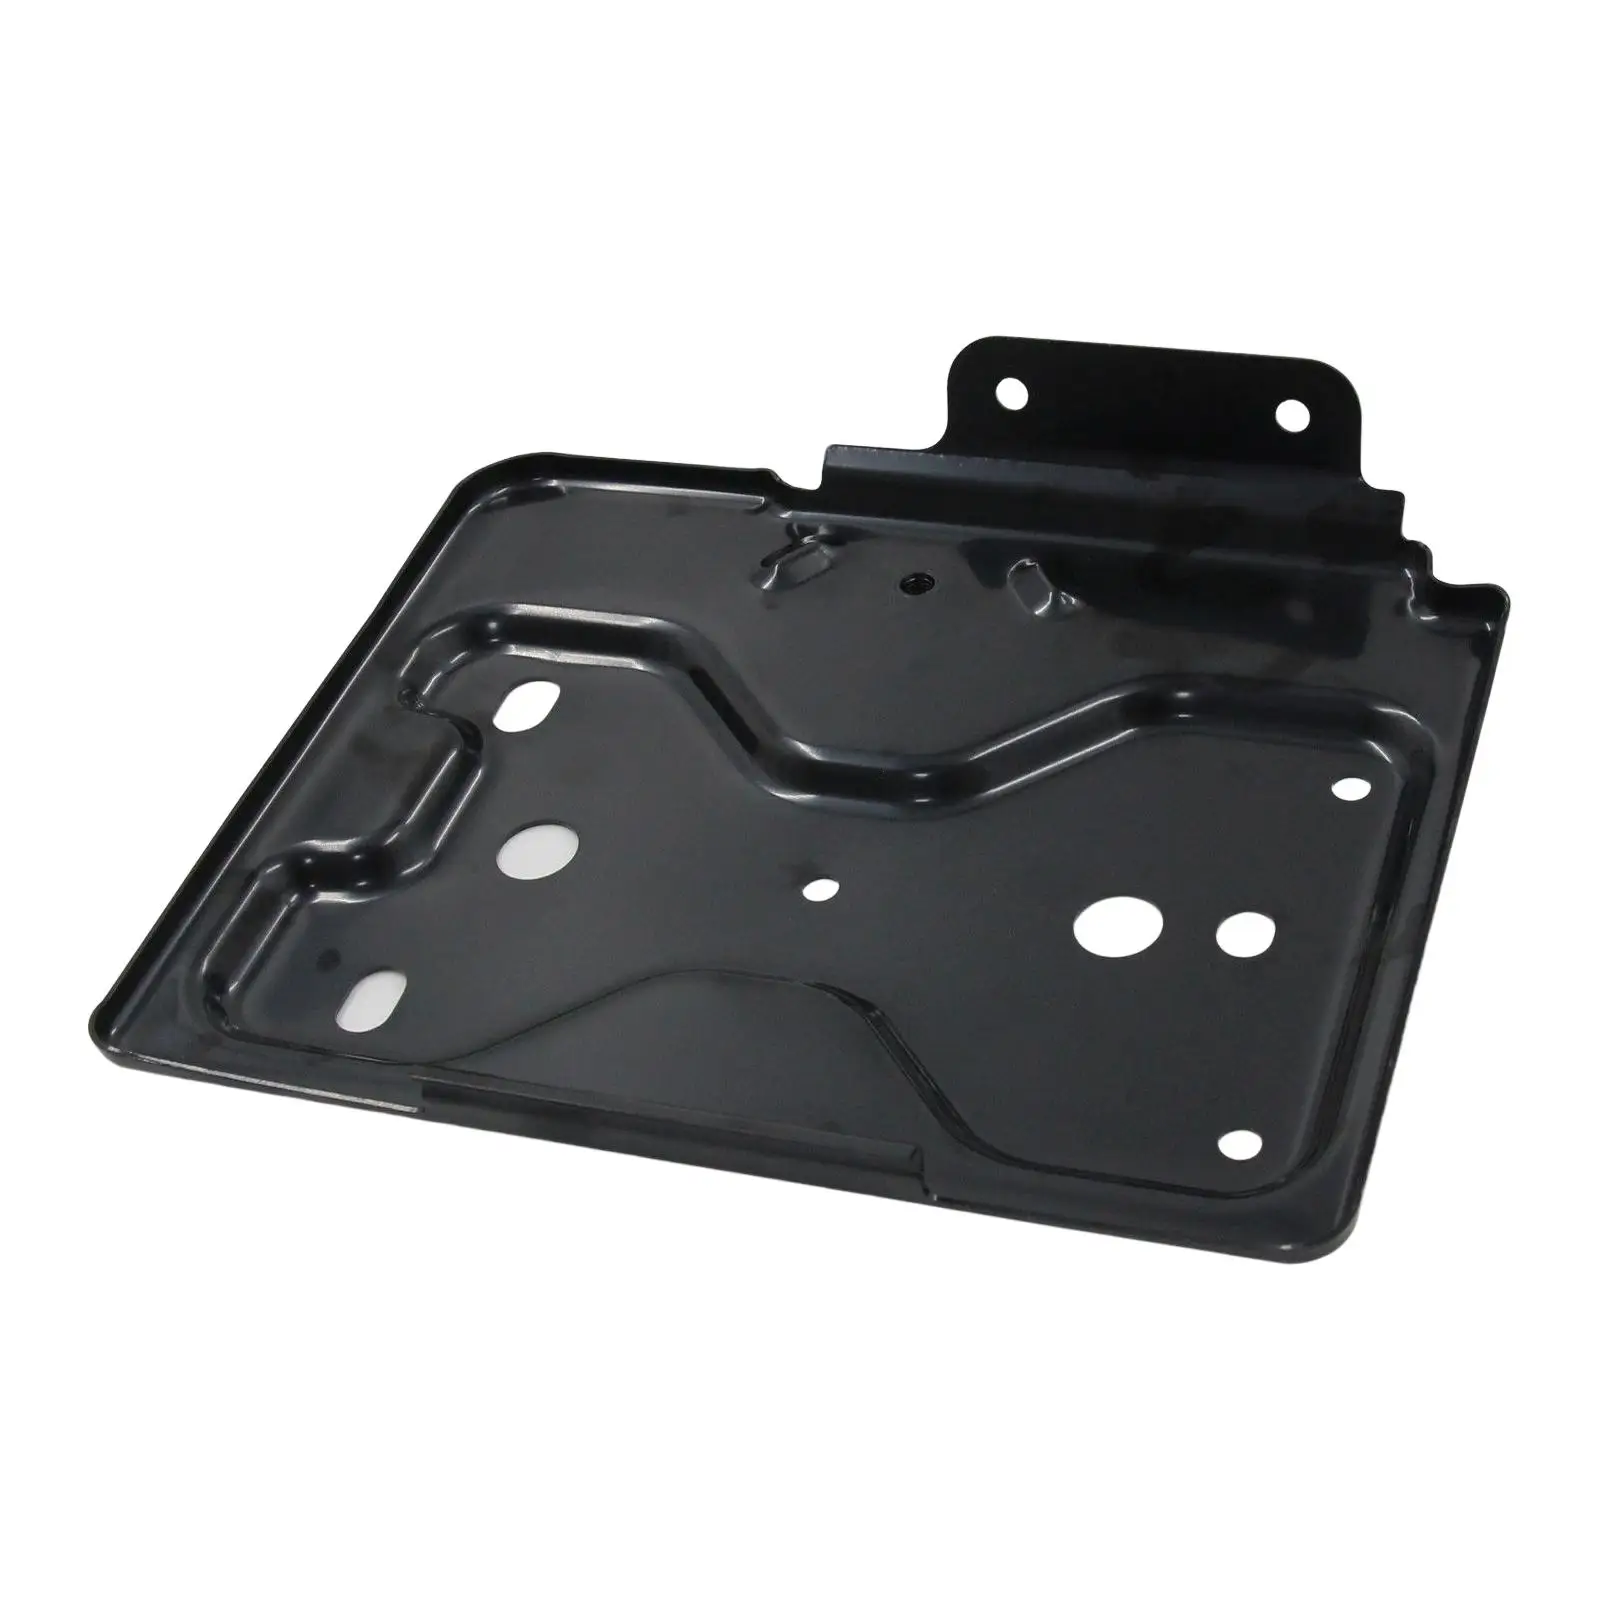 Driver Side Battery Tray Premium Durable High Performance Car Accessories Replaces Spare Parts for Chevrolet Silverado 1500